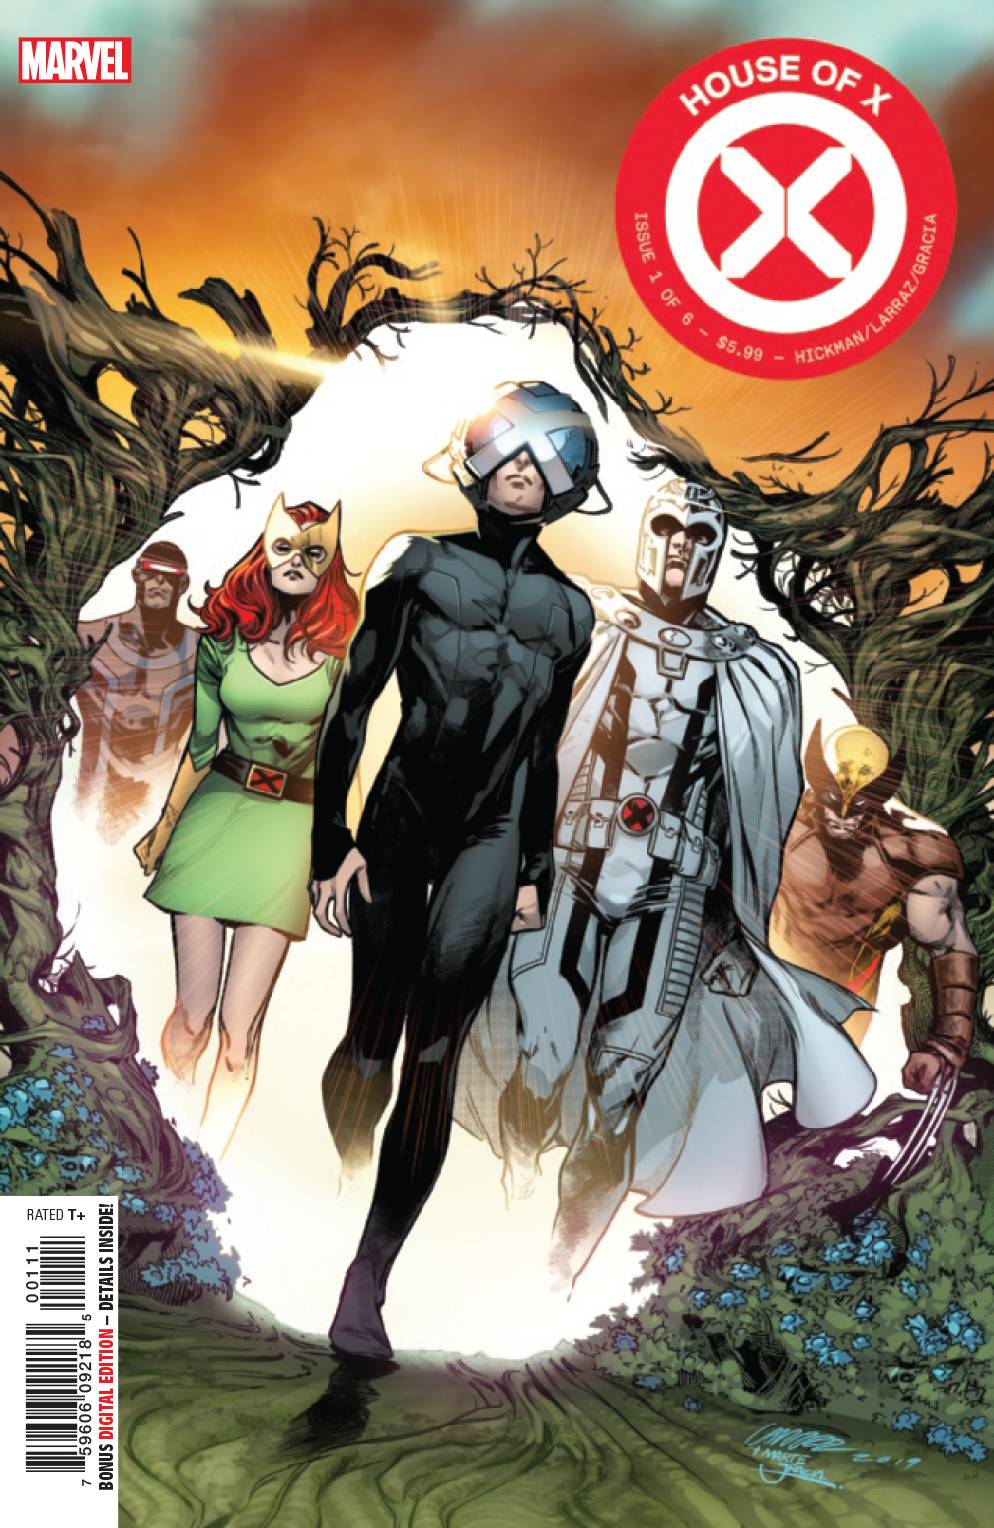 House of X #1 (of 6) - State of Comics